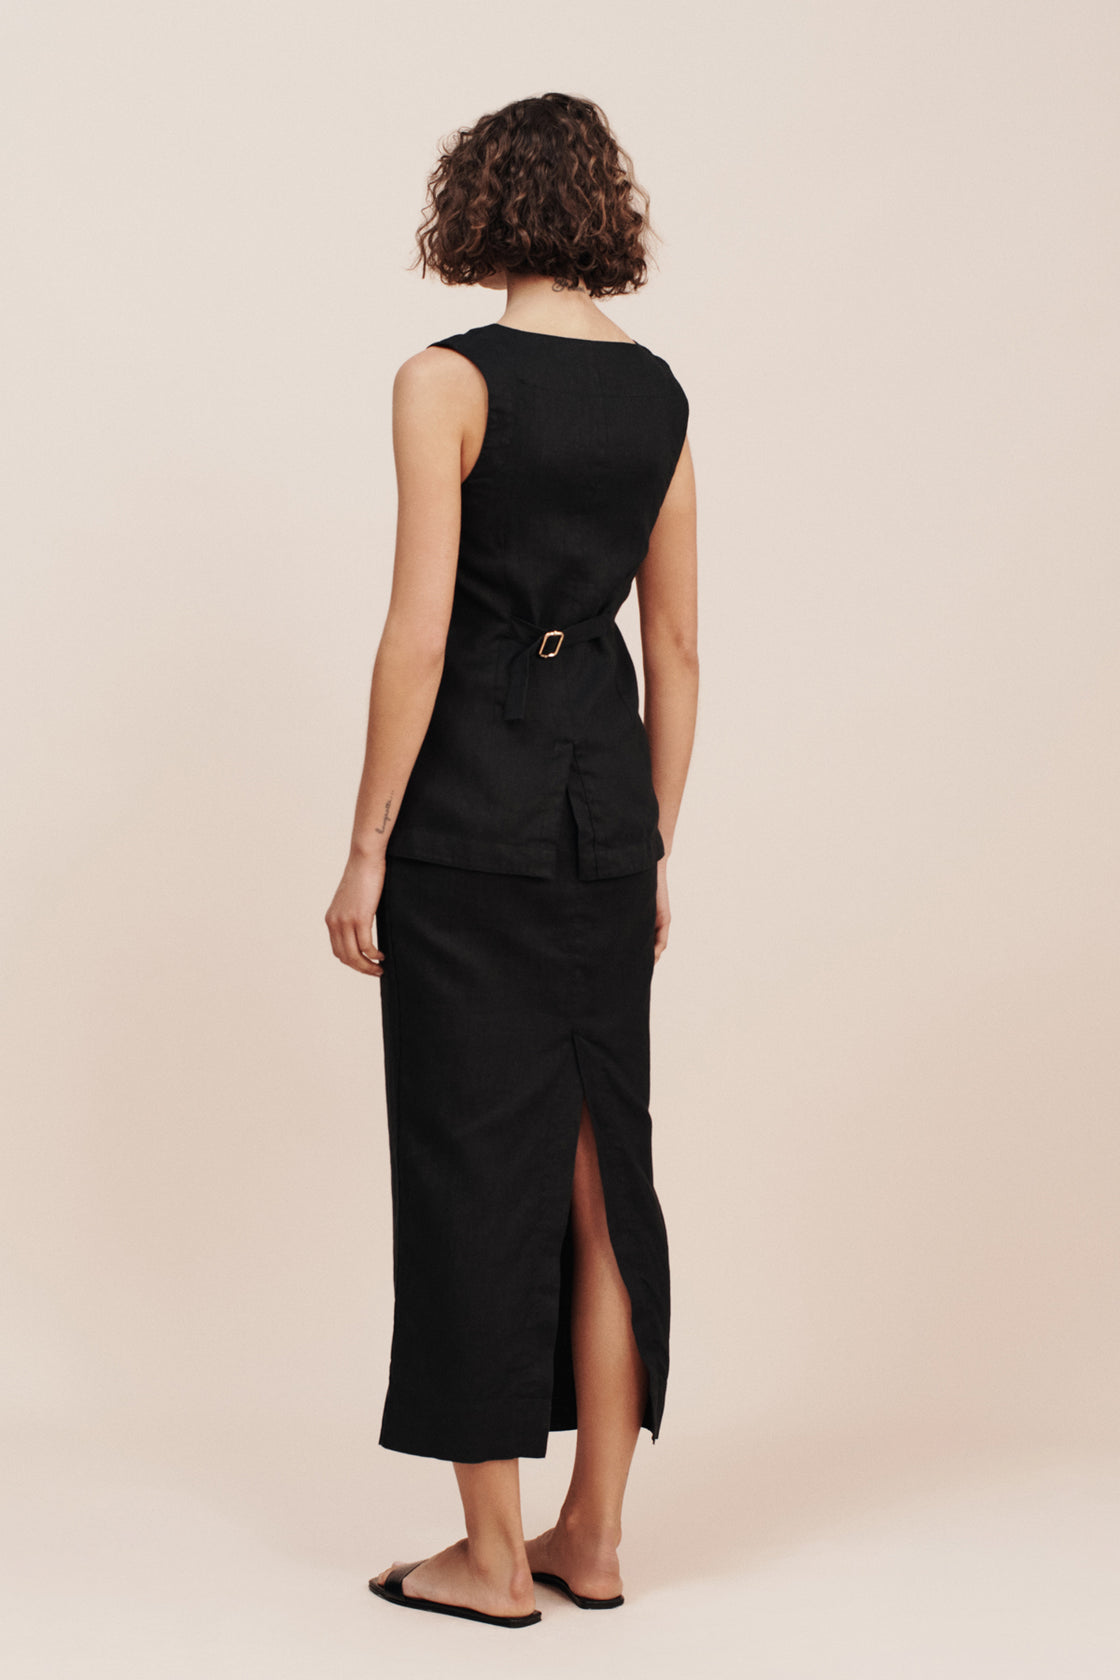 Posse Emma Pencil Skirt in Black available at TNT The New Trend Australia 